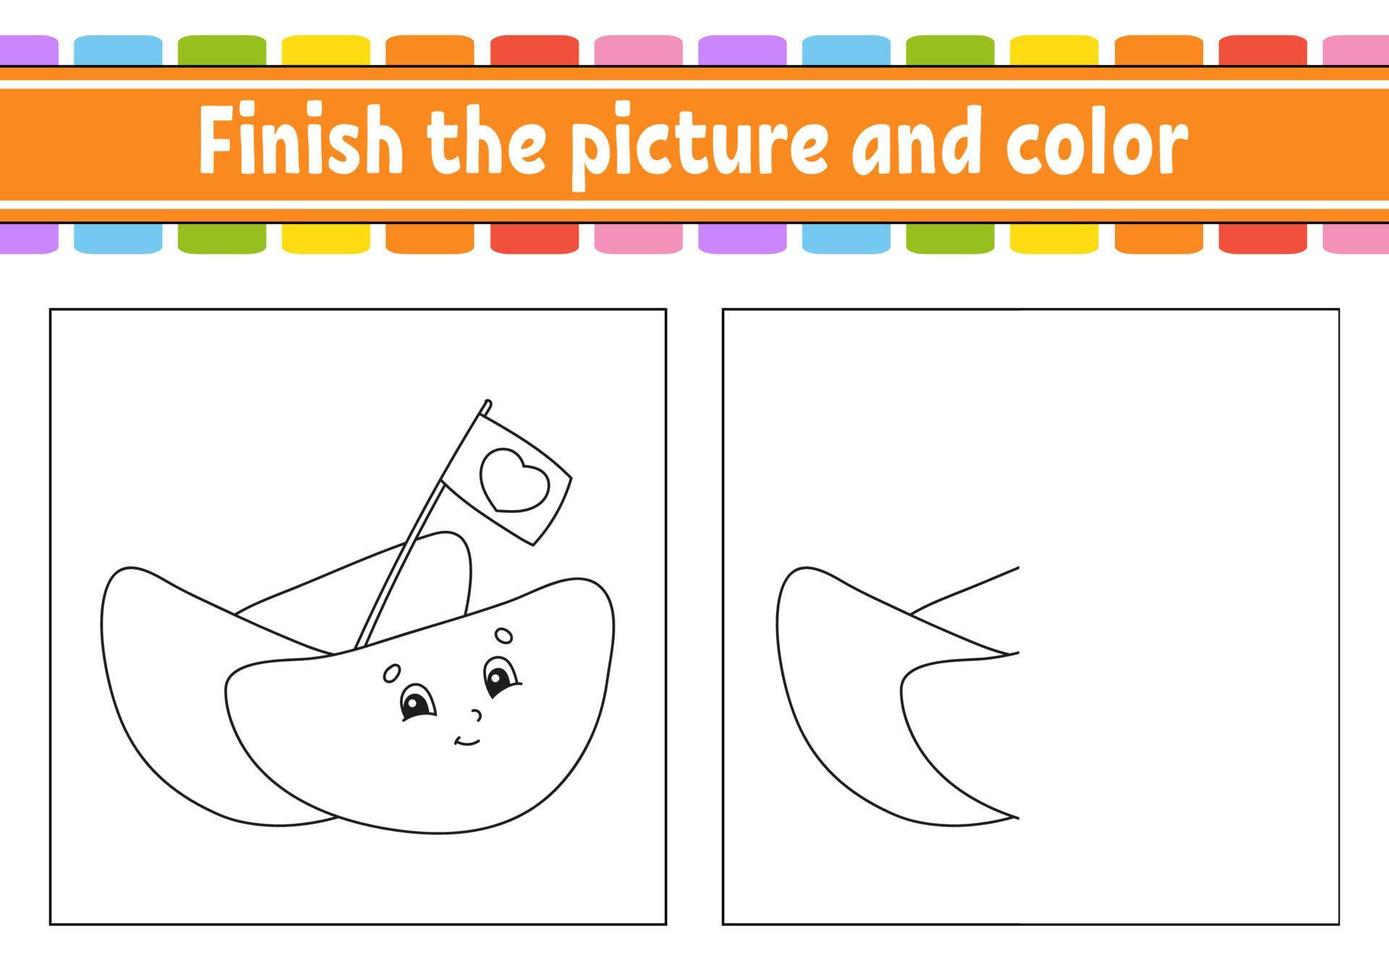 Finish the picture and color. cartoon character isolated on white background. For kids education. Activity worksheet. vector